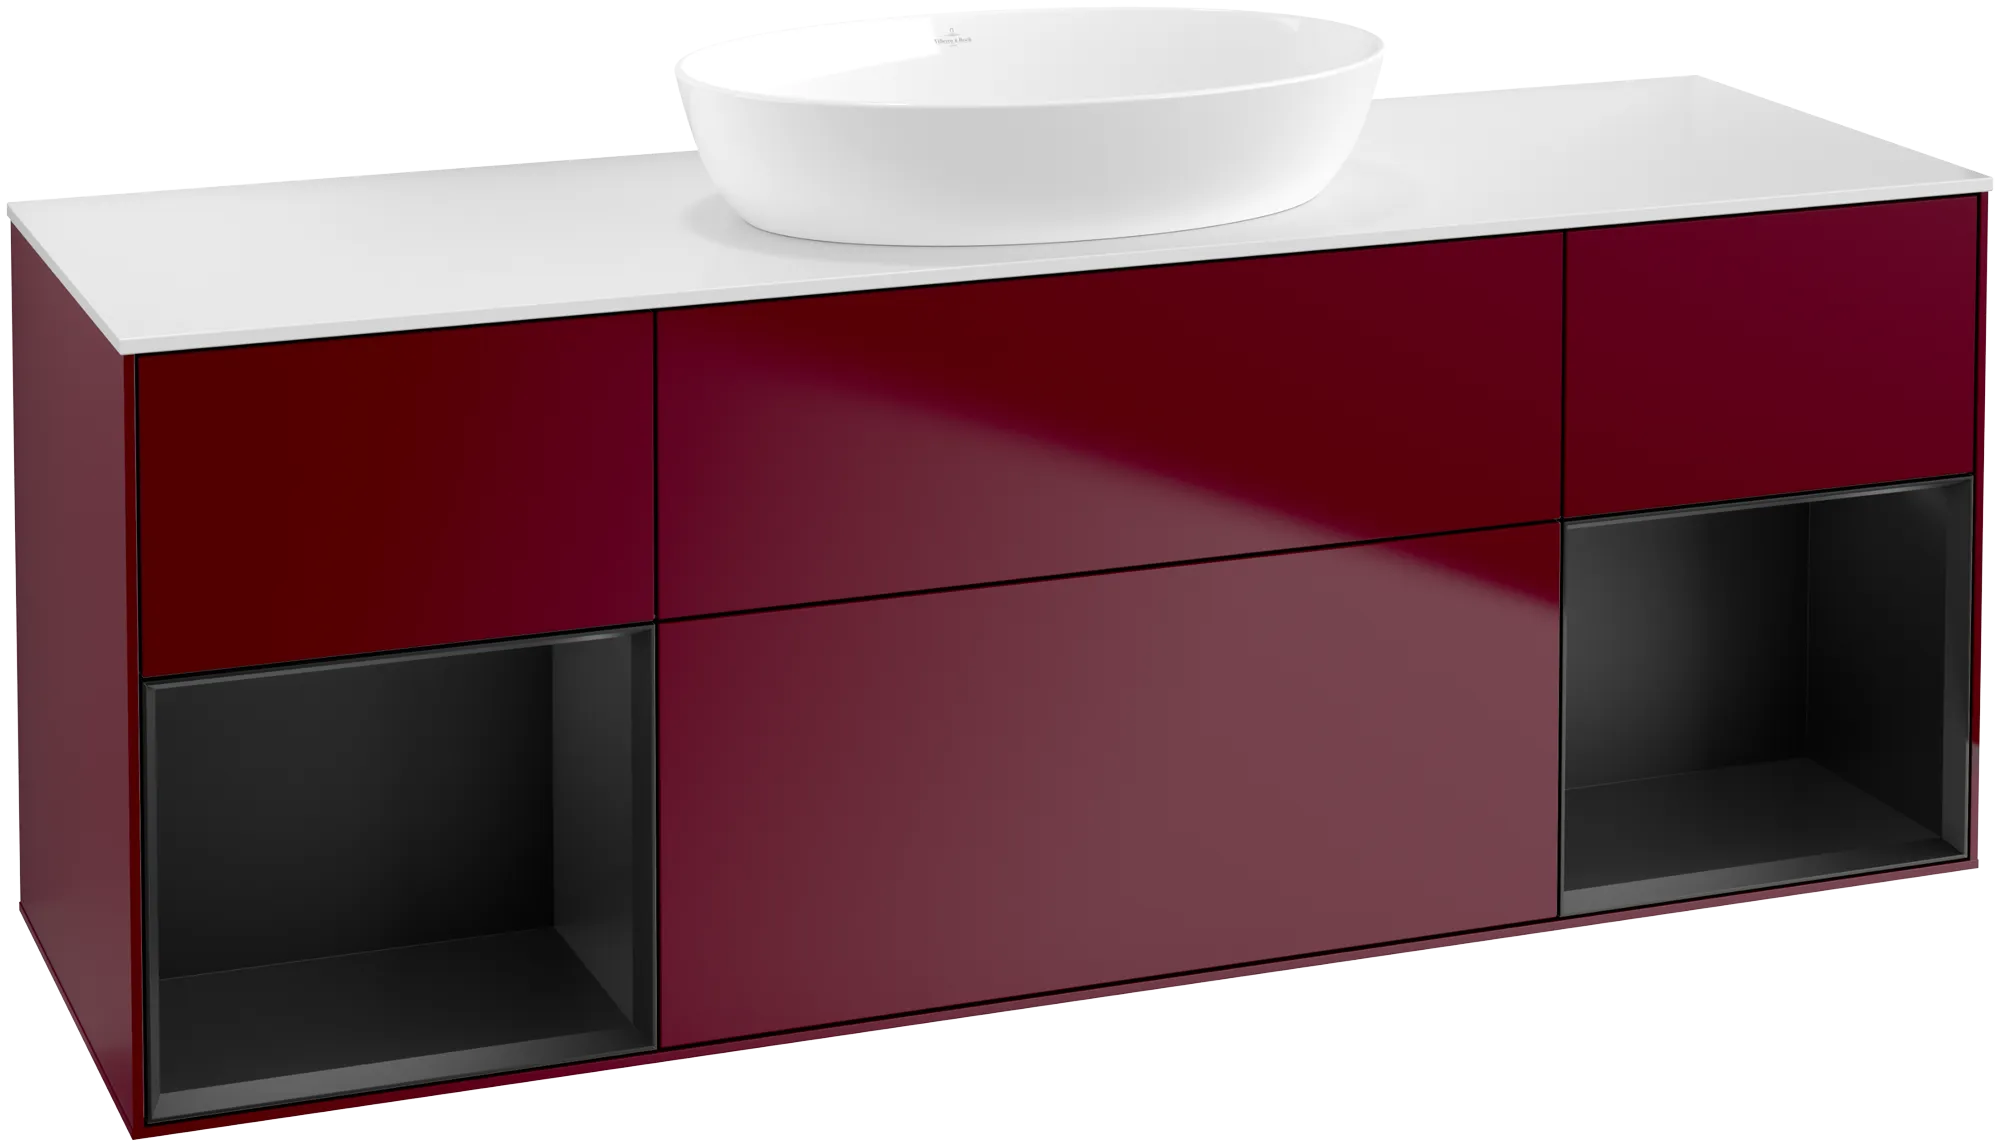 Picture of VILLEROY BOCH Finion Vanity unit, with lighting, 4 pull-out compartments, 1600 x 603 x 501 mm, Peony Matt Lacquer / Black Matt Lacquer / Glass White Matt #GD01PDHB